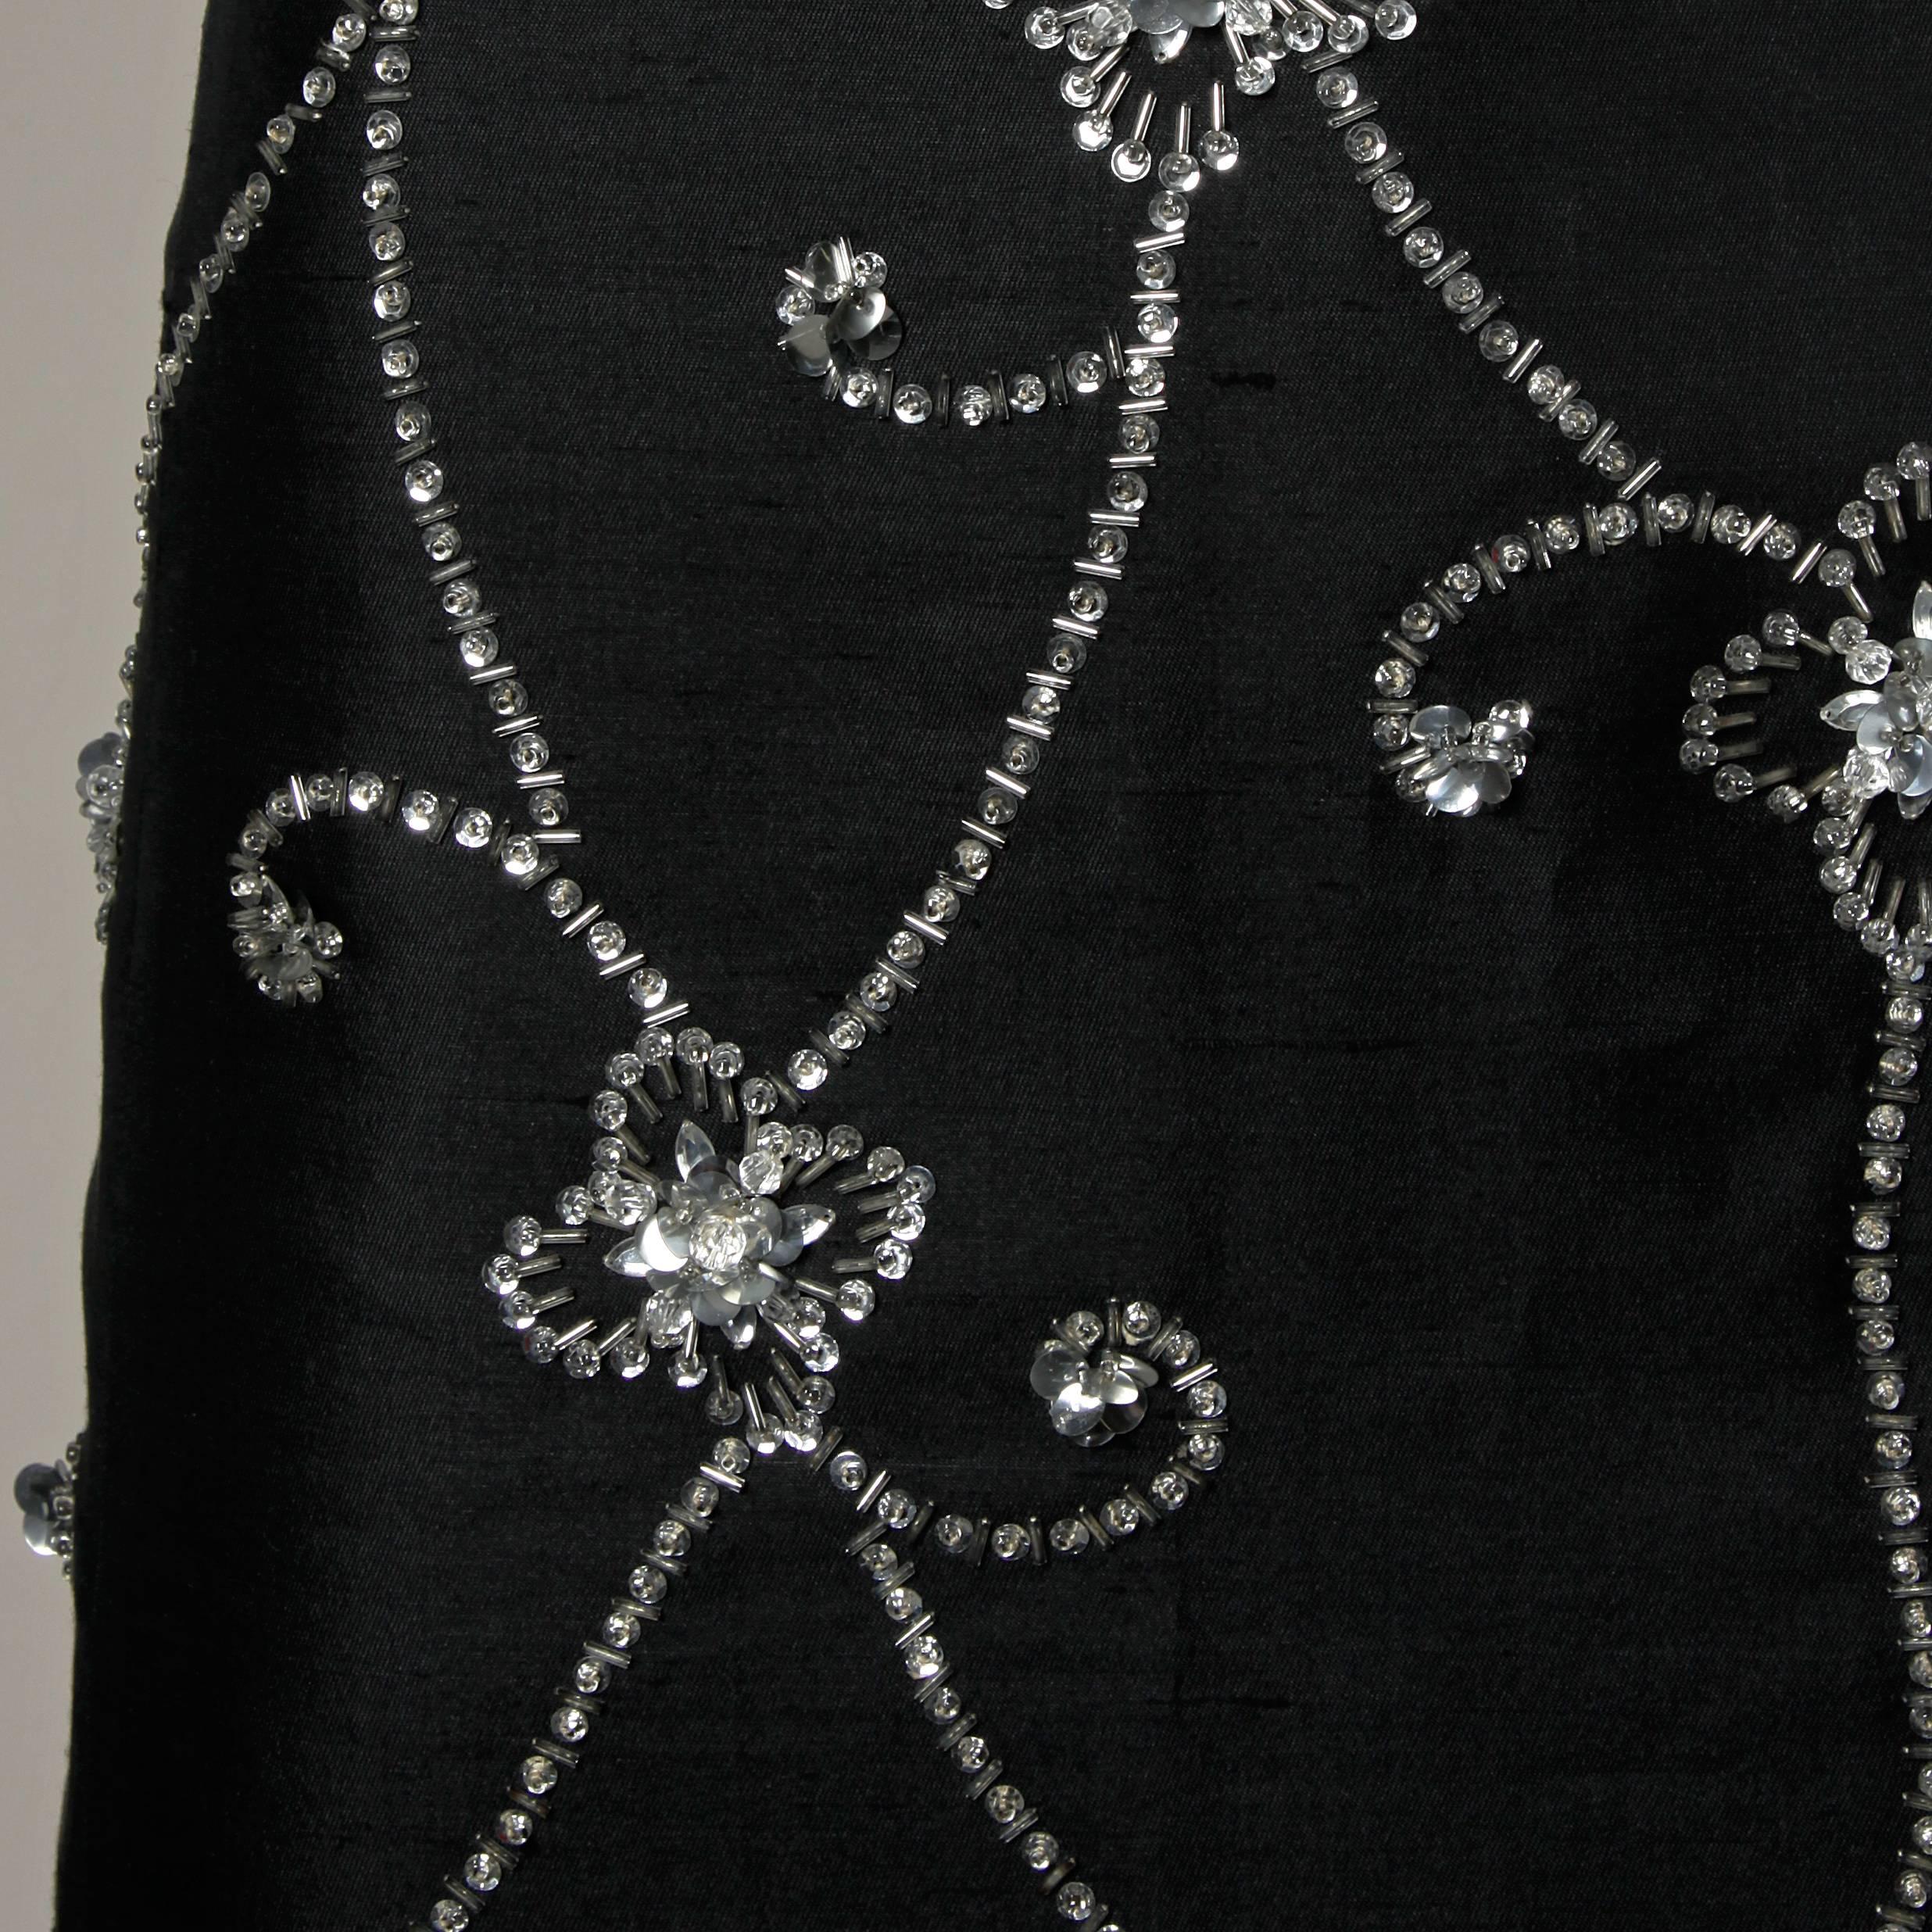 Women's 1960s Vintage Silk + Wool Maxi Dress with Crystal Beads, Sequins + Rhinestones